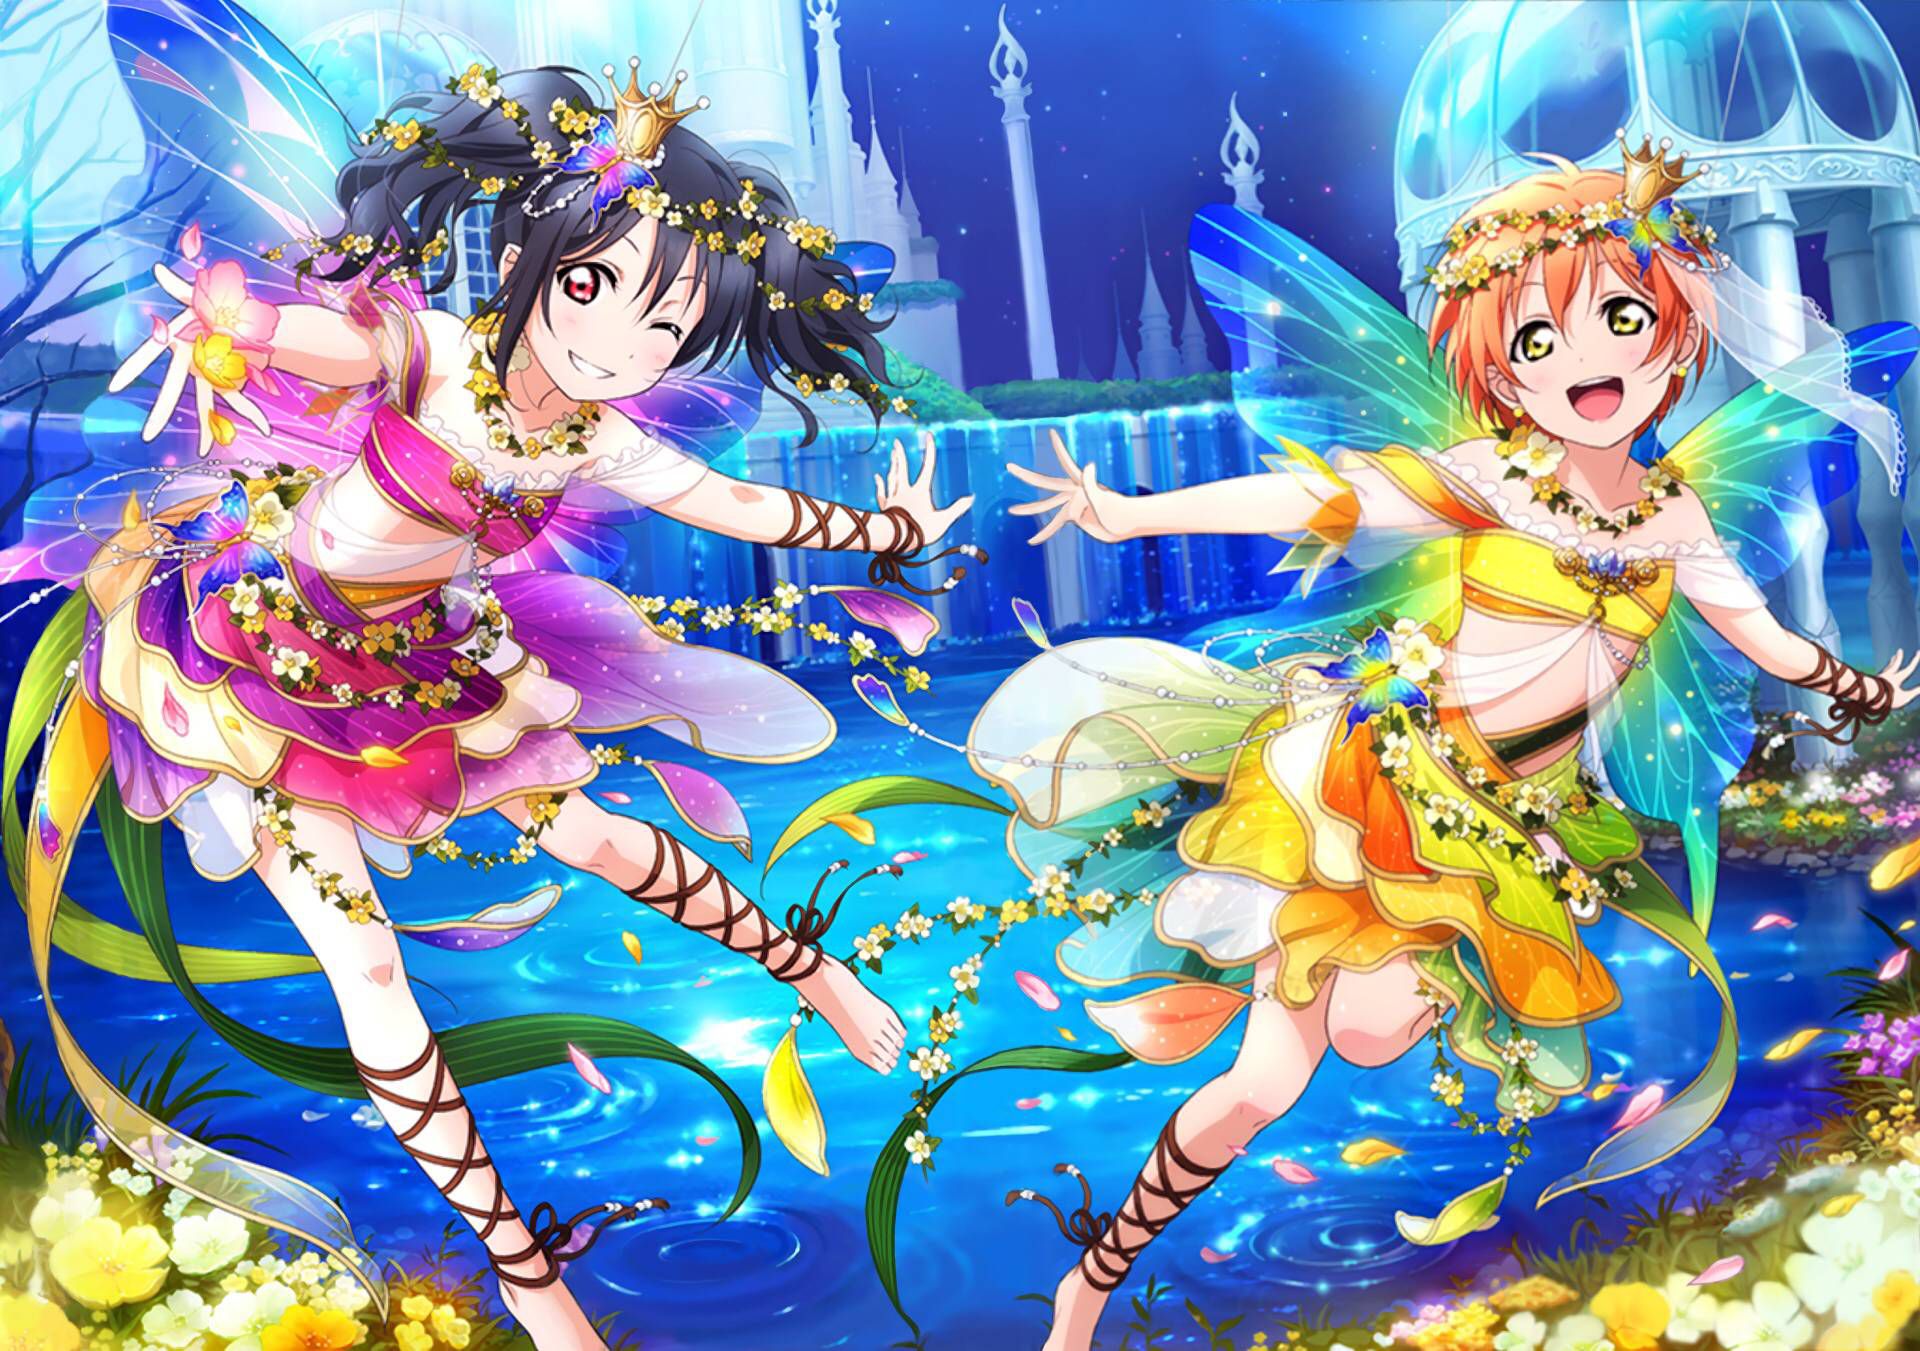 [God images] "love live! ' Eraser frame scuffed from wwww UR illustrations too erotic, love rainy and want to be 66